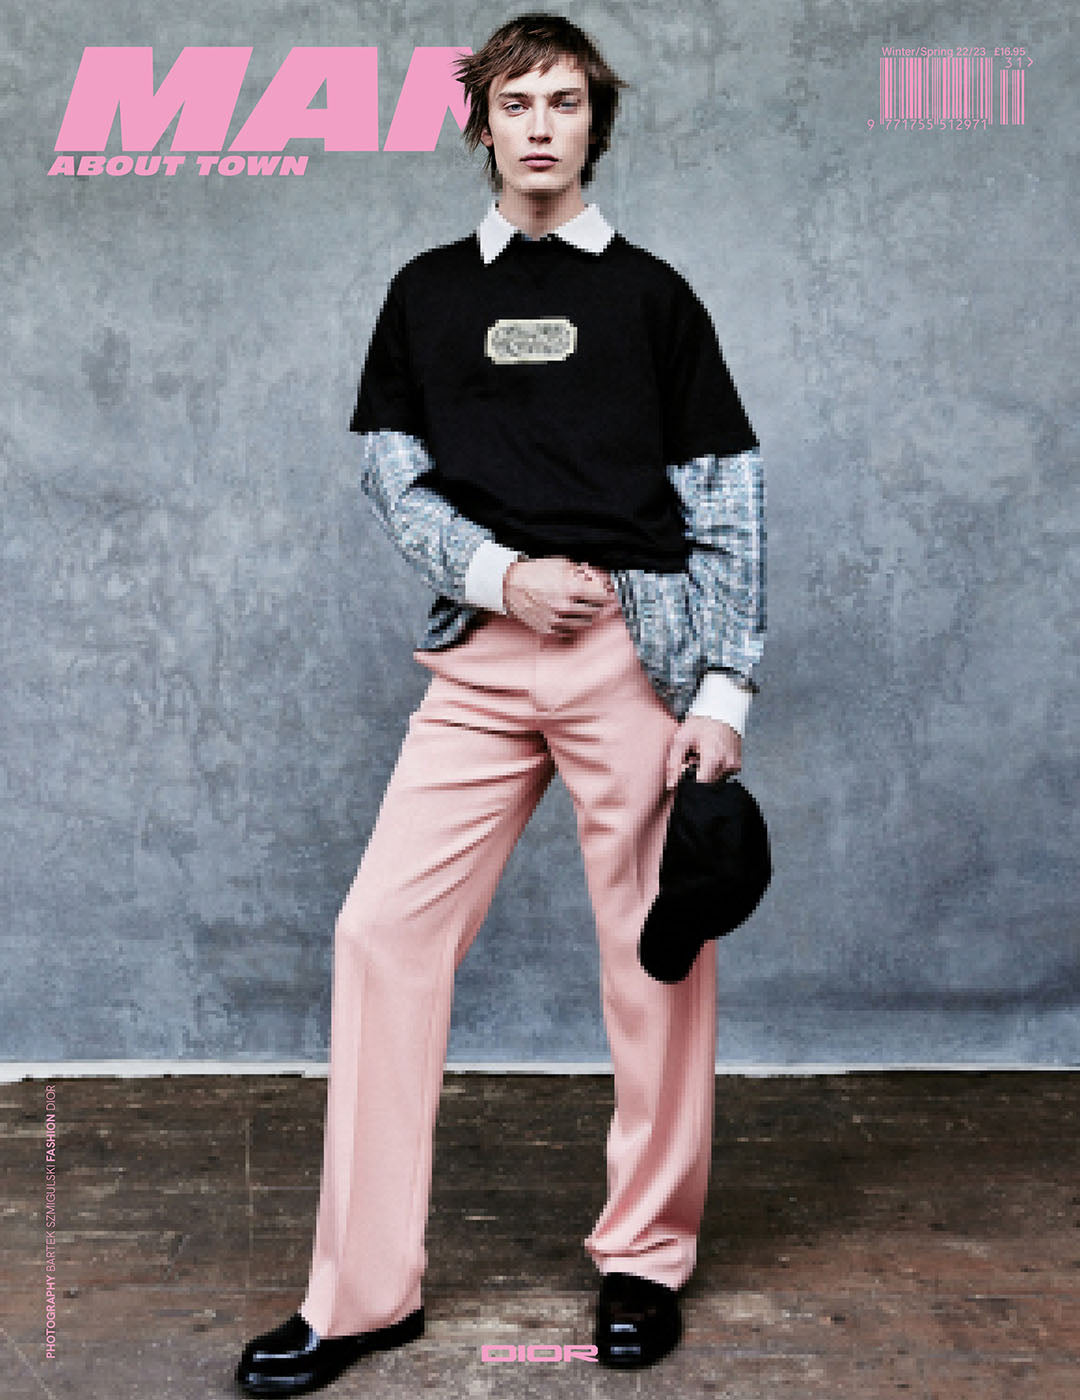 Freek Iven covers Man About Town's Winter/Spring 2022/23 Issue in Dior